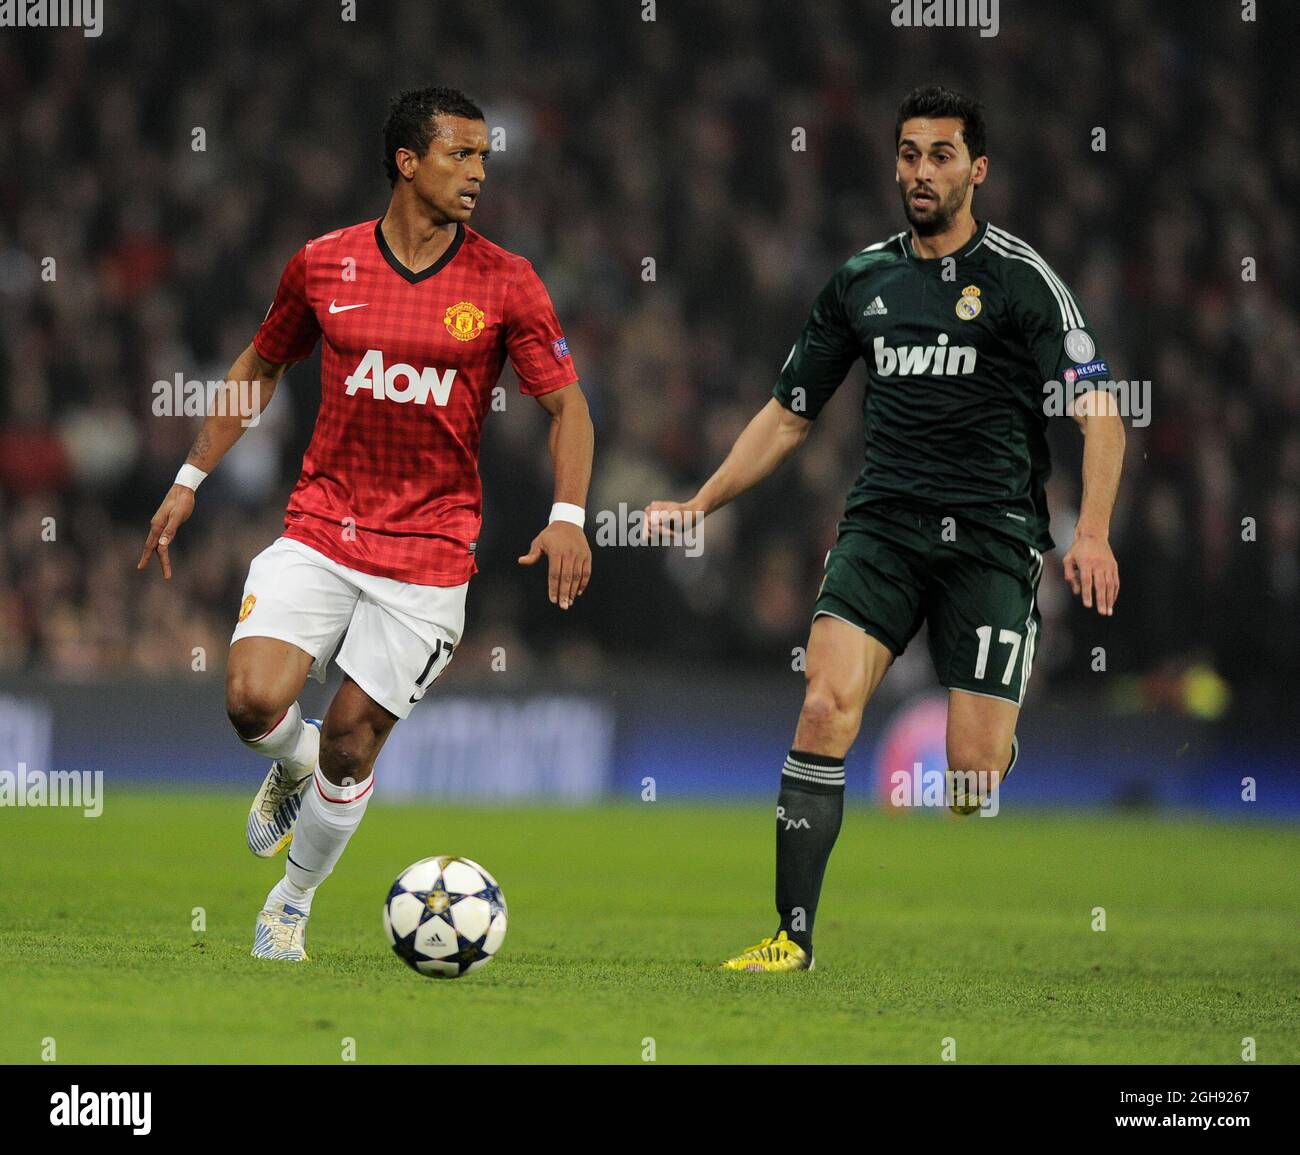 Nani of Manchester United tussles with Alvaro Arbeloa of Real Madrid during the UEFA Champions League round 16, match between Manchester United and Real Madrid at Old Trafford Stadium in Manchester, UK on March 5, 2013. Stock Photo